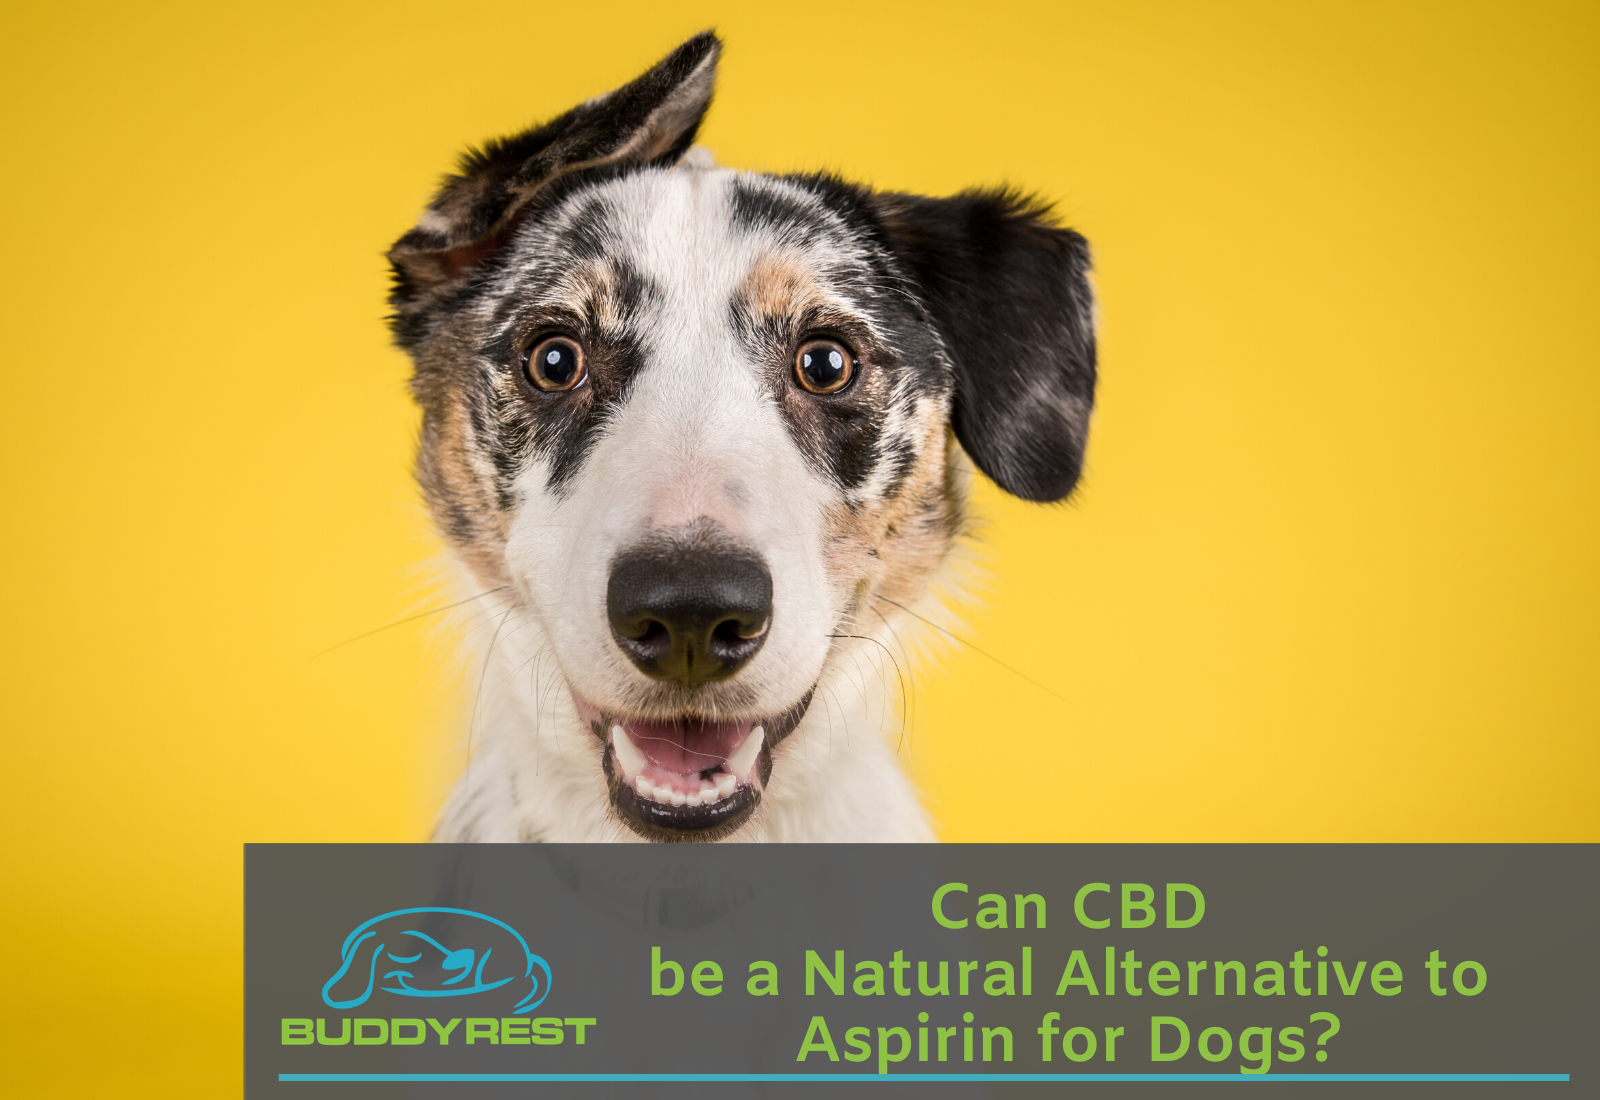 Can CBD be a Natural Alternative to Aspirin for Dogs?